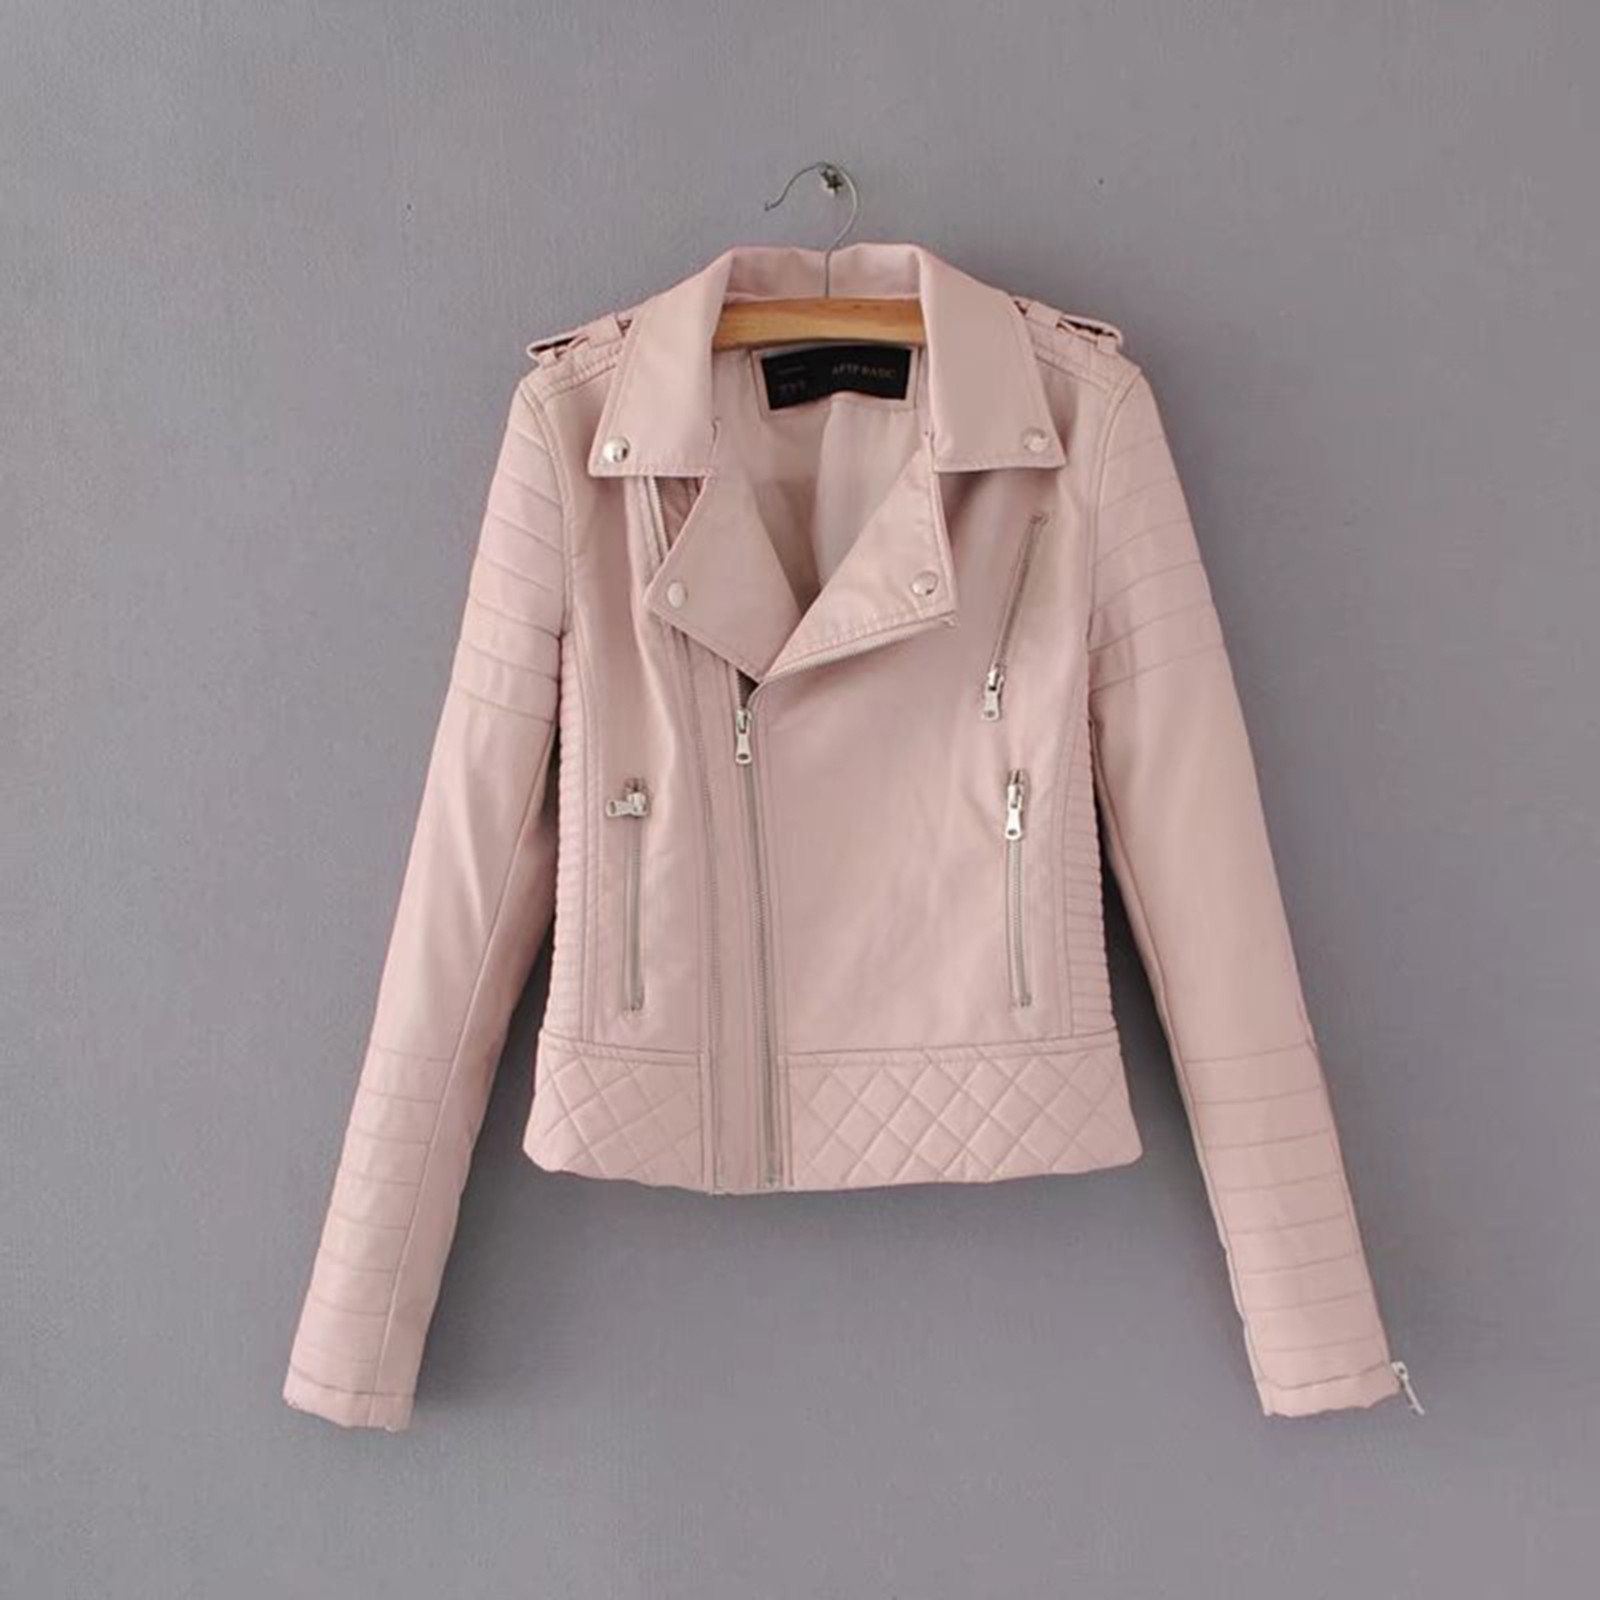 HSMQHJWE Knit Jackets And Blazers Soft Pile Vest Women Leather Short Jacket Jacket Zipper Casual Quilting Trend Pu Short Jacket Fashion Motorcycle Jacket Down Jackets For Women Petite - image 2 of 4